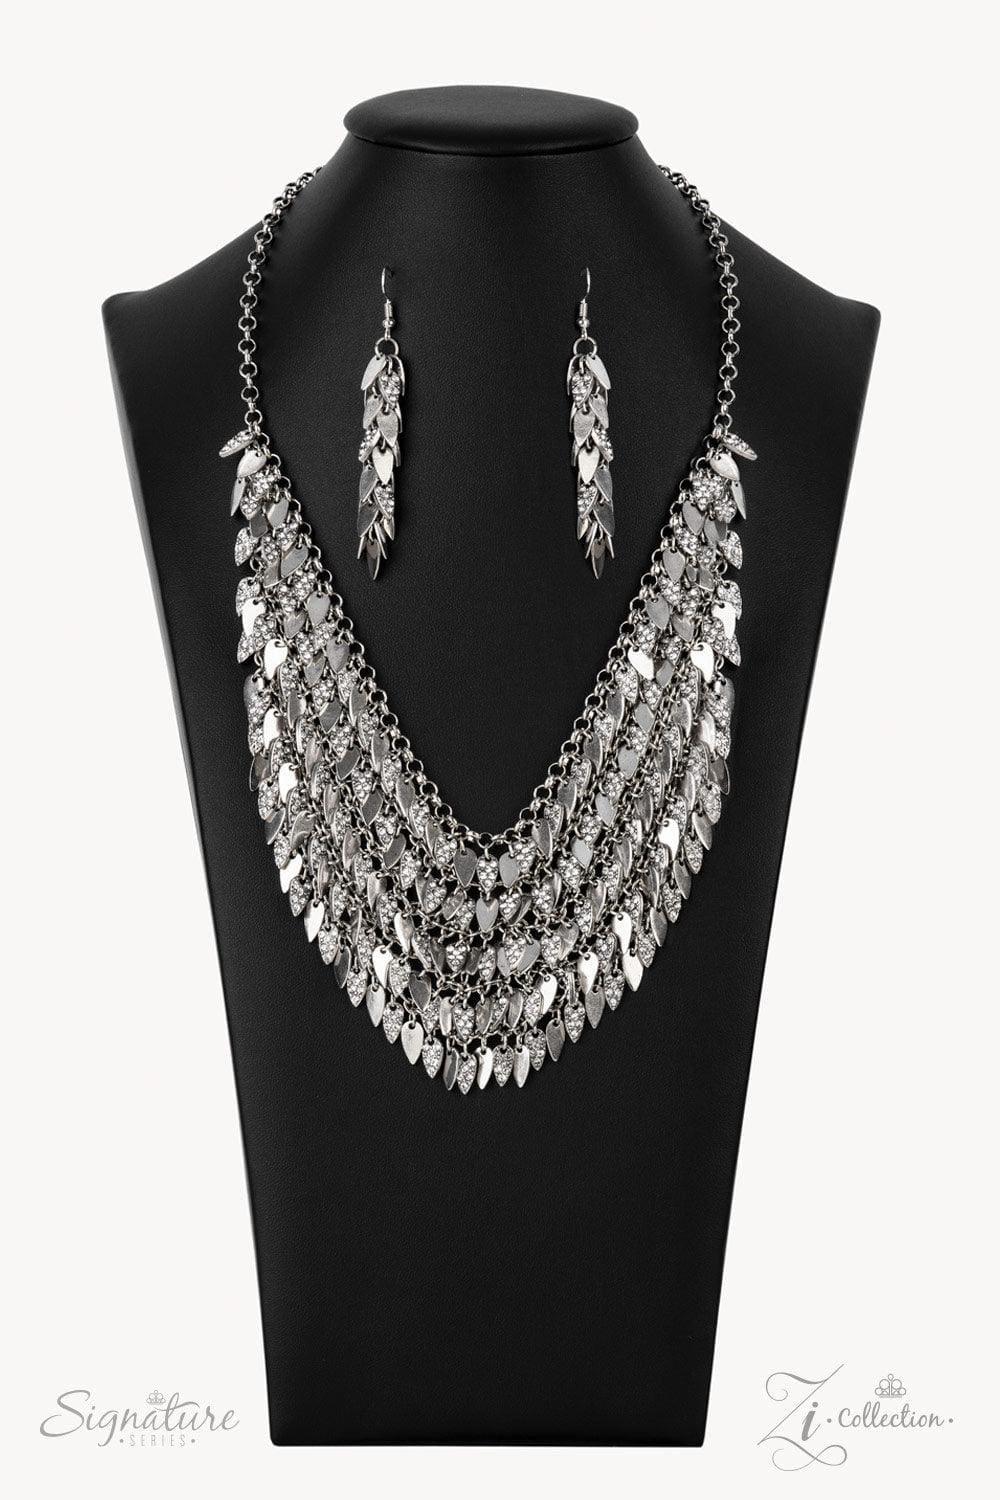 Paparazzi Accessories - The Nakisha - 2021 Signature Zi Collection Necklace - Bling by JessieK